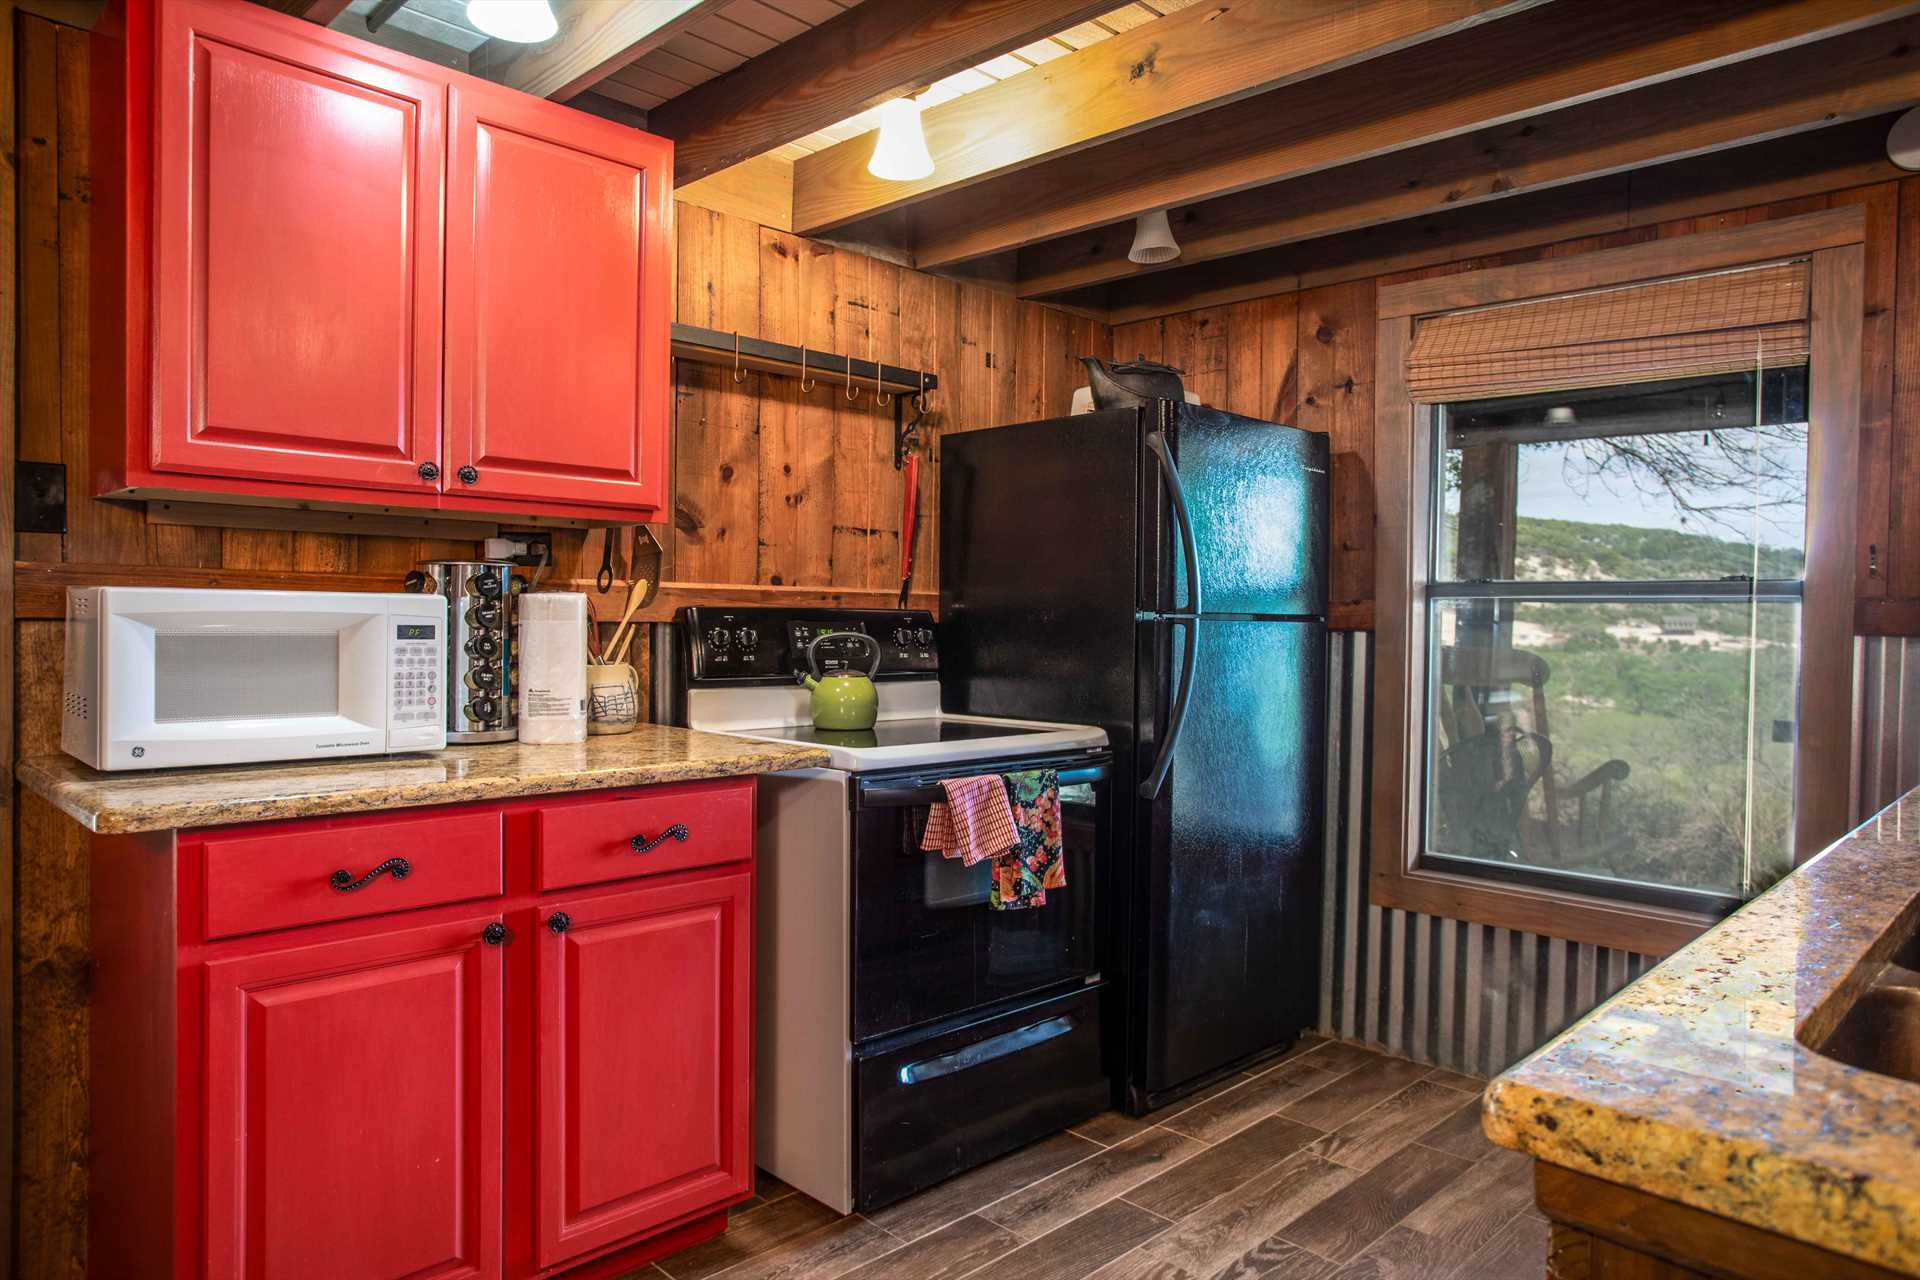                                                 Modern appliances add ease and function to the kitchen at Medina Mountain, not to mention that pretty Hill Country view!